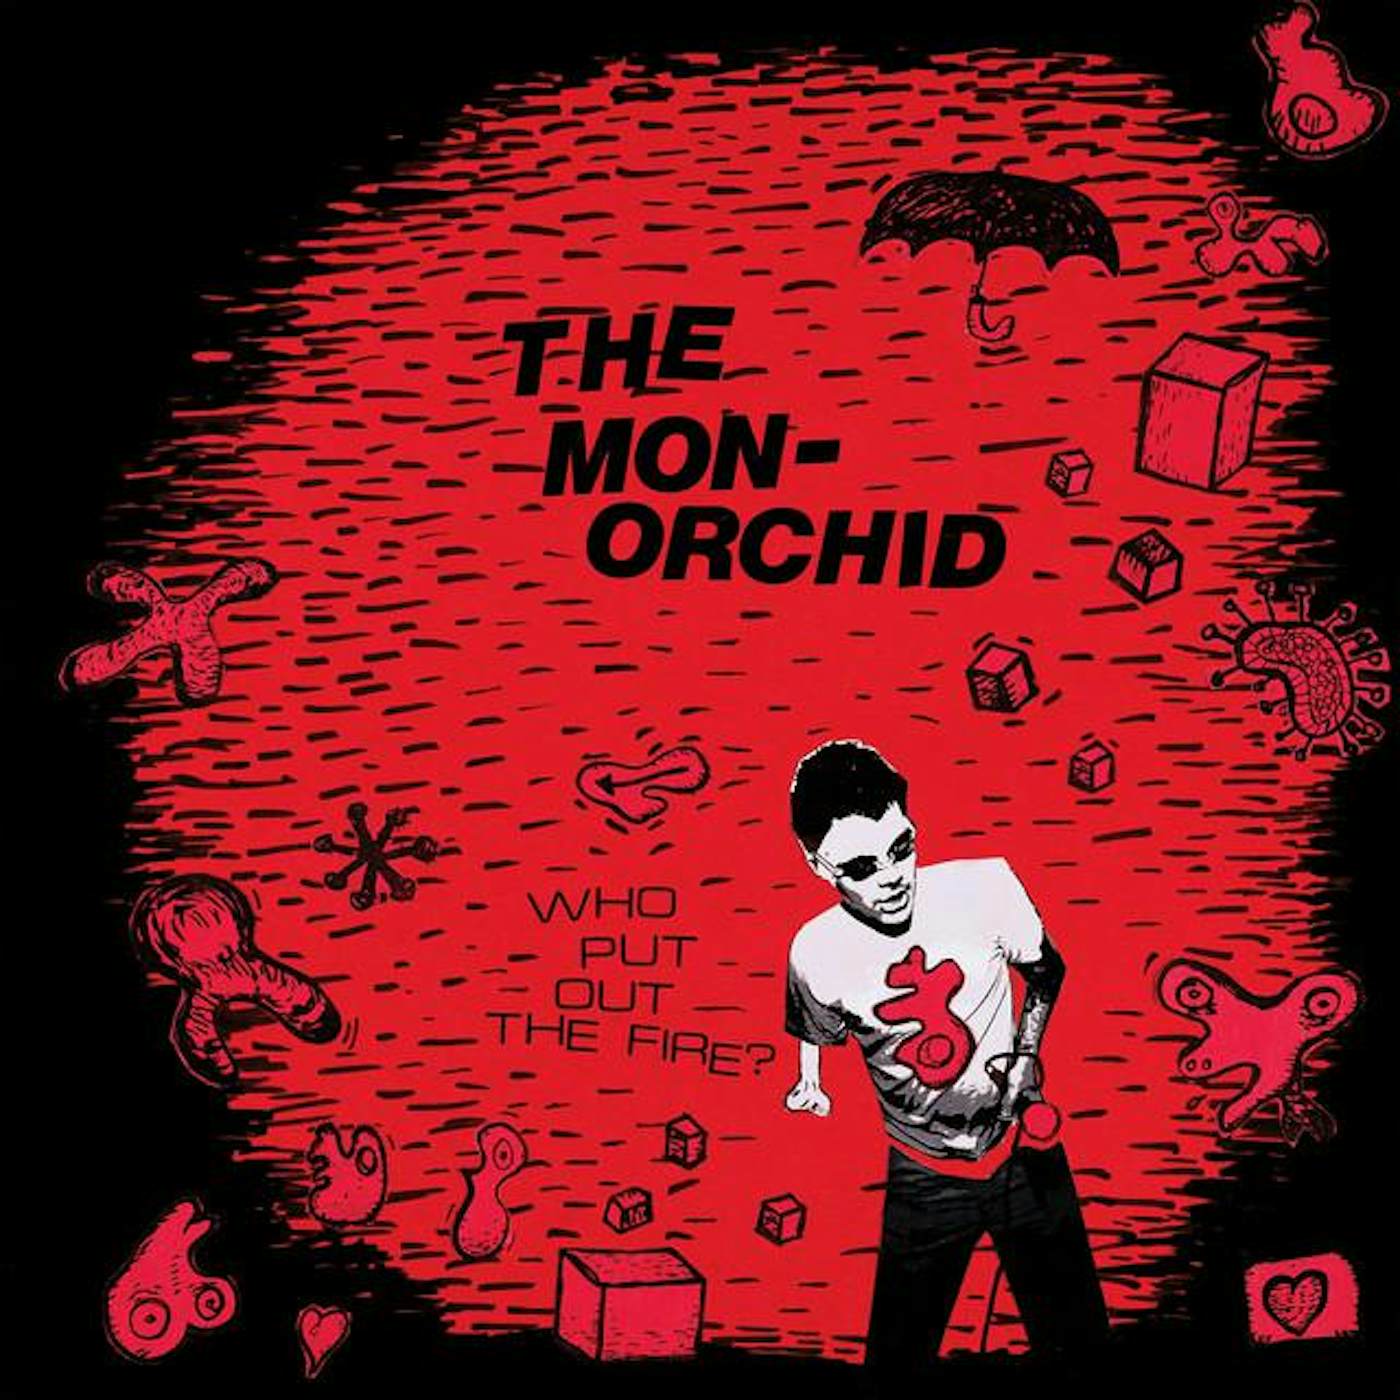 The Monorchid